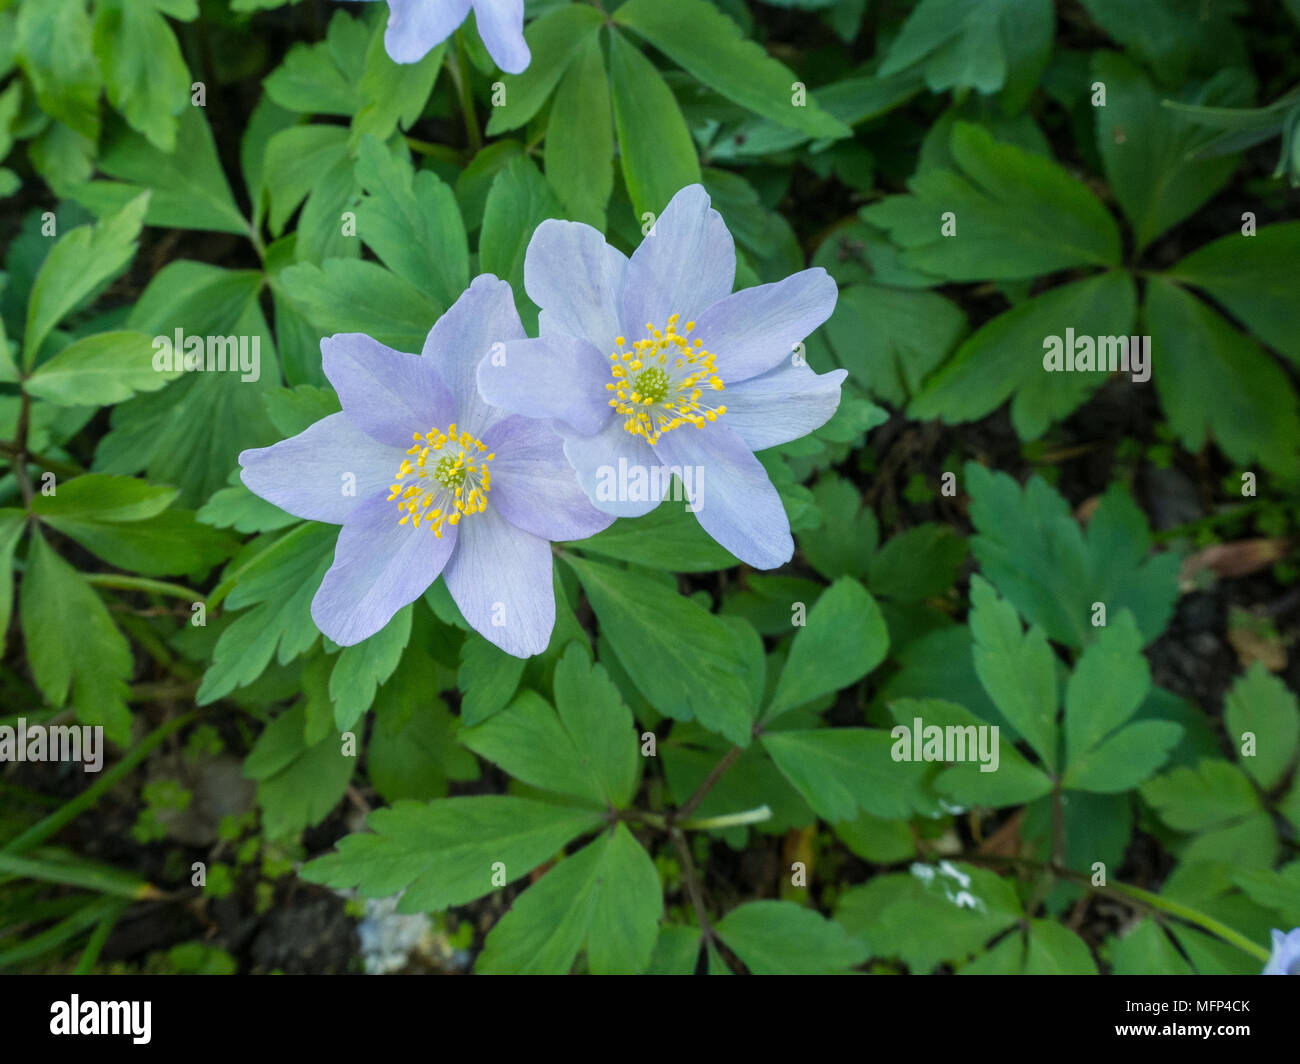 Close up of the sky blue flowers of Anemone nemorosa 'Robinsoniana' against its leaves Stock Photo